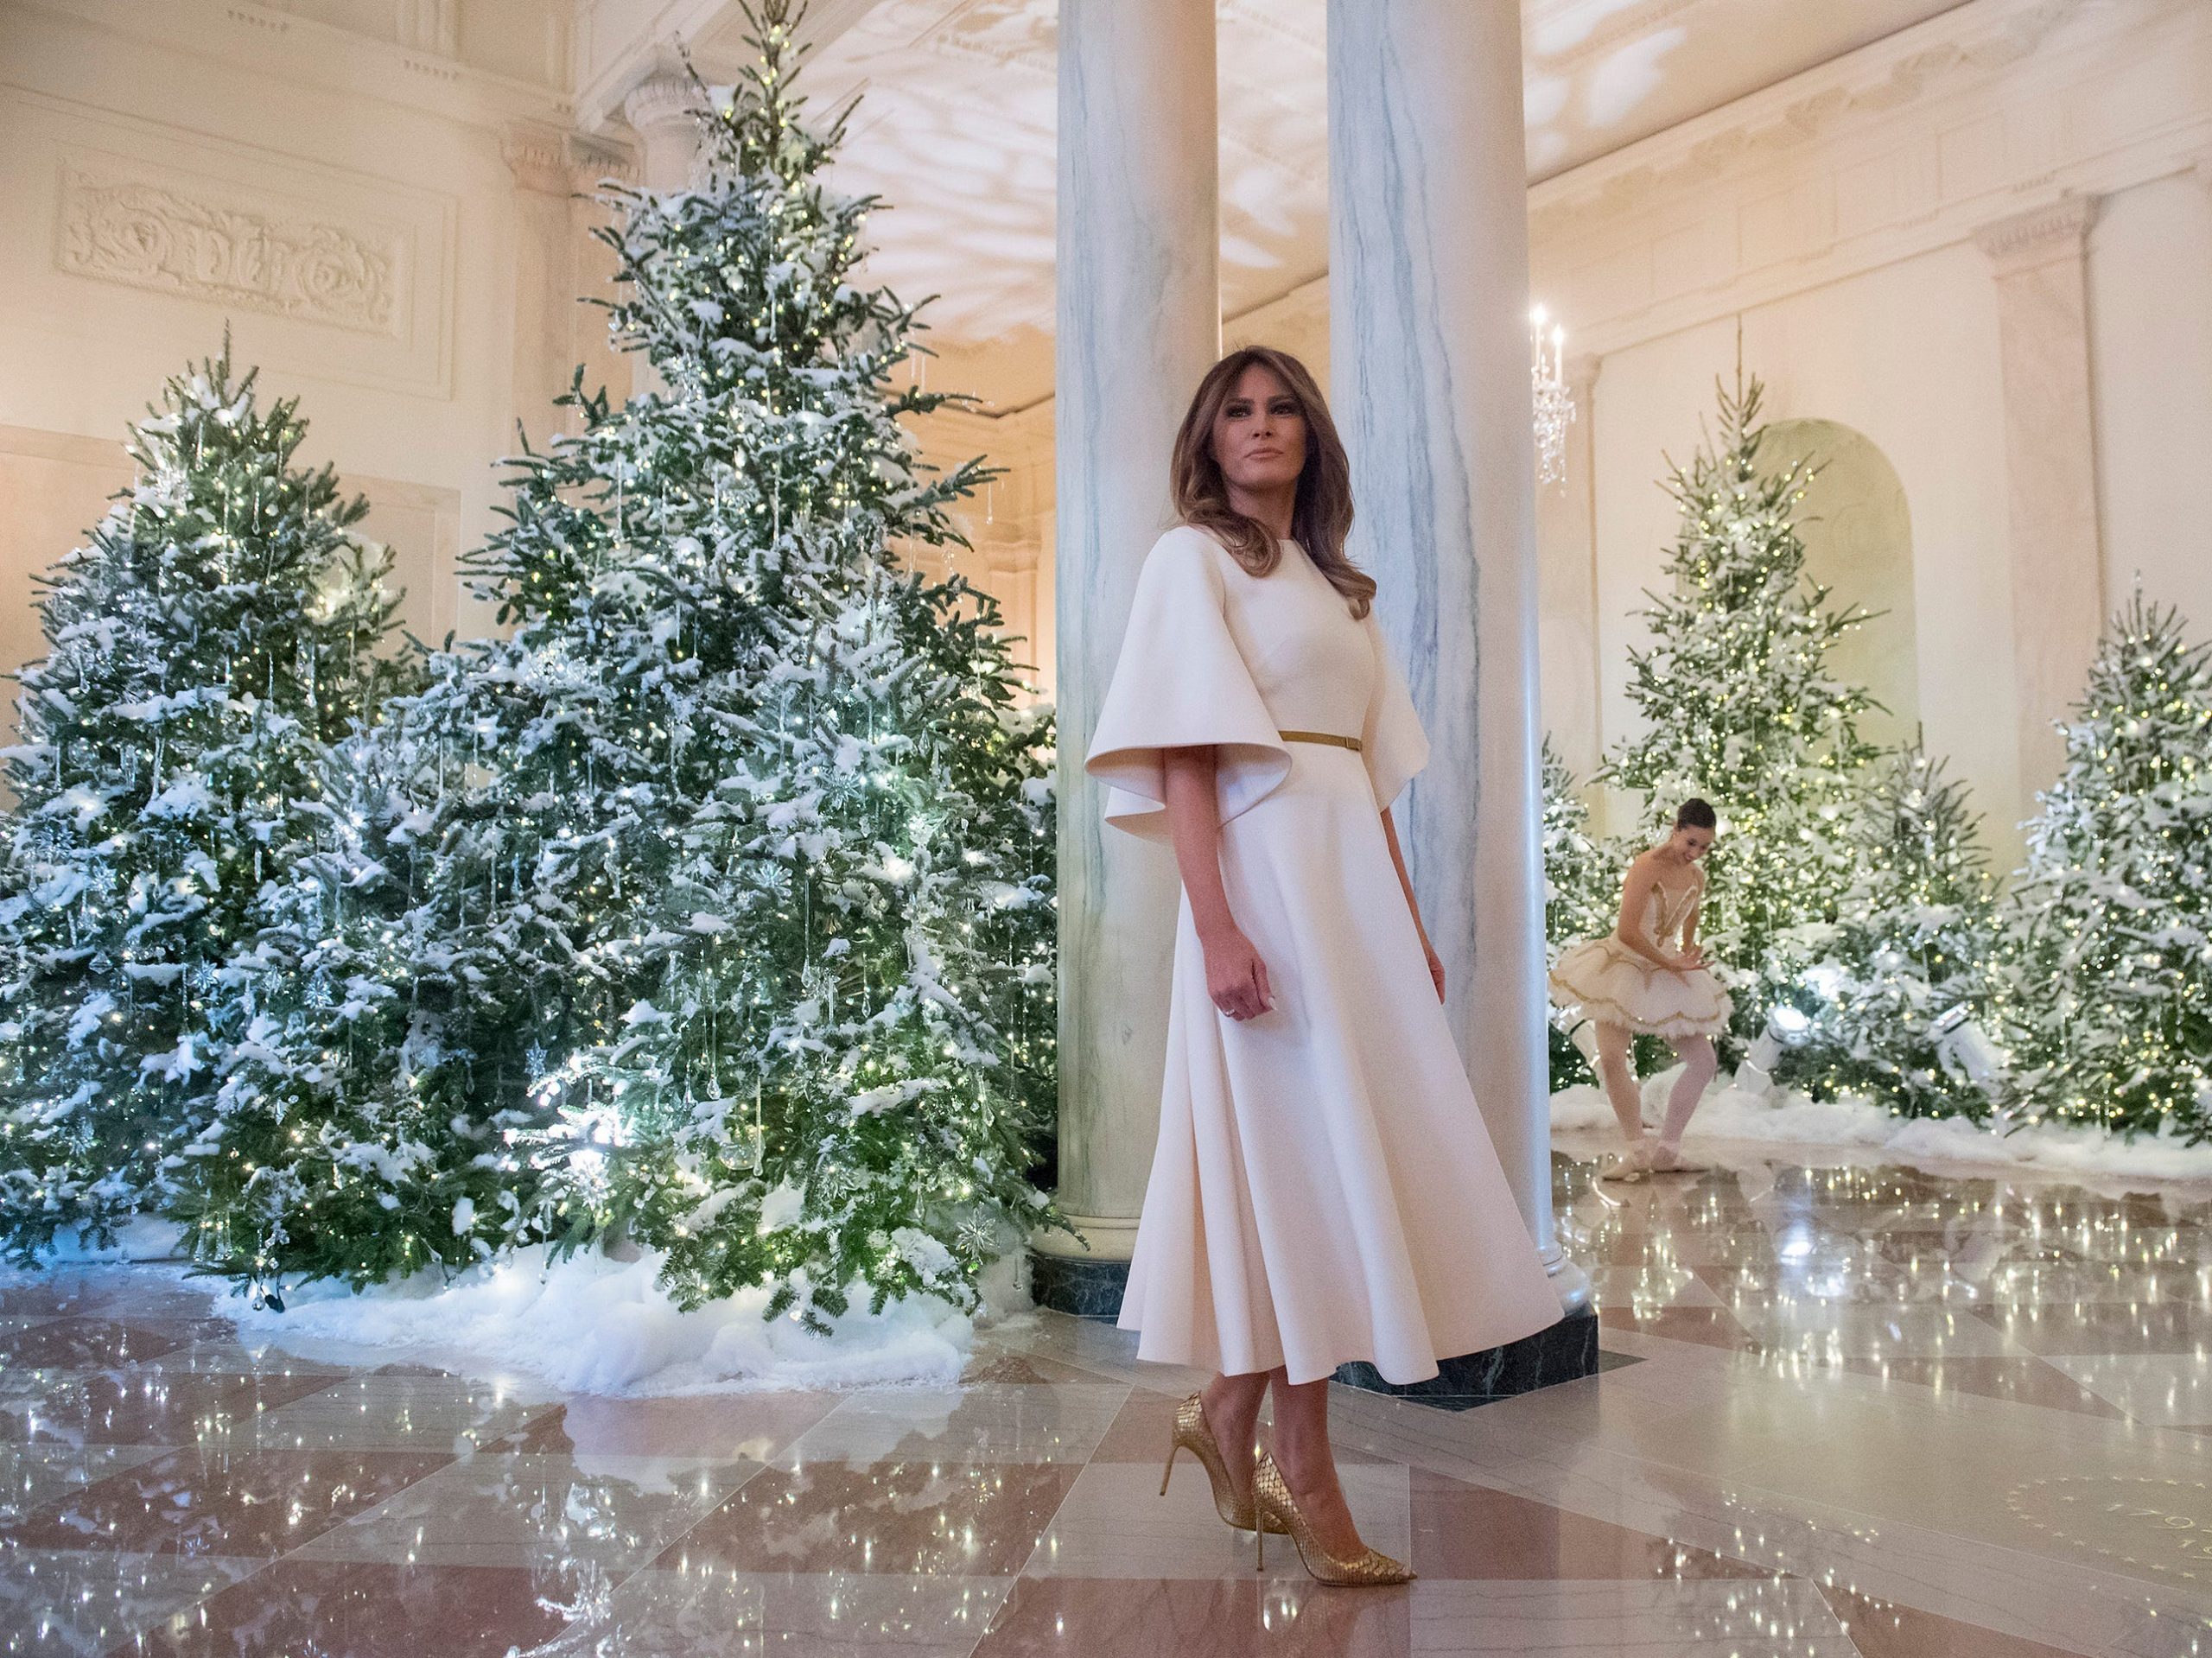 Melania Trump shows the White House Christmas decorations in 2017.